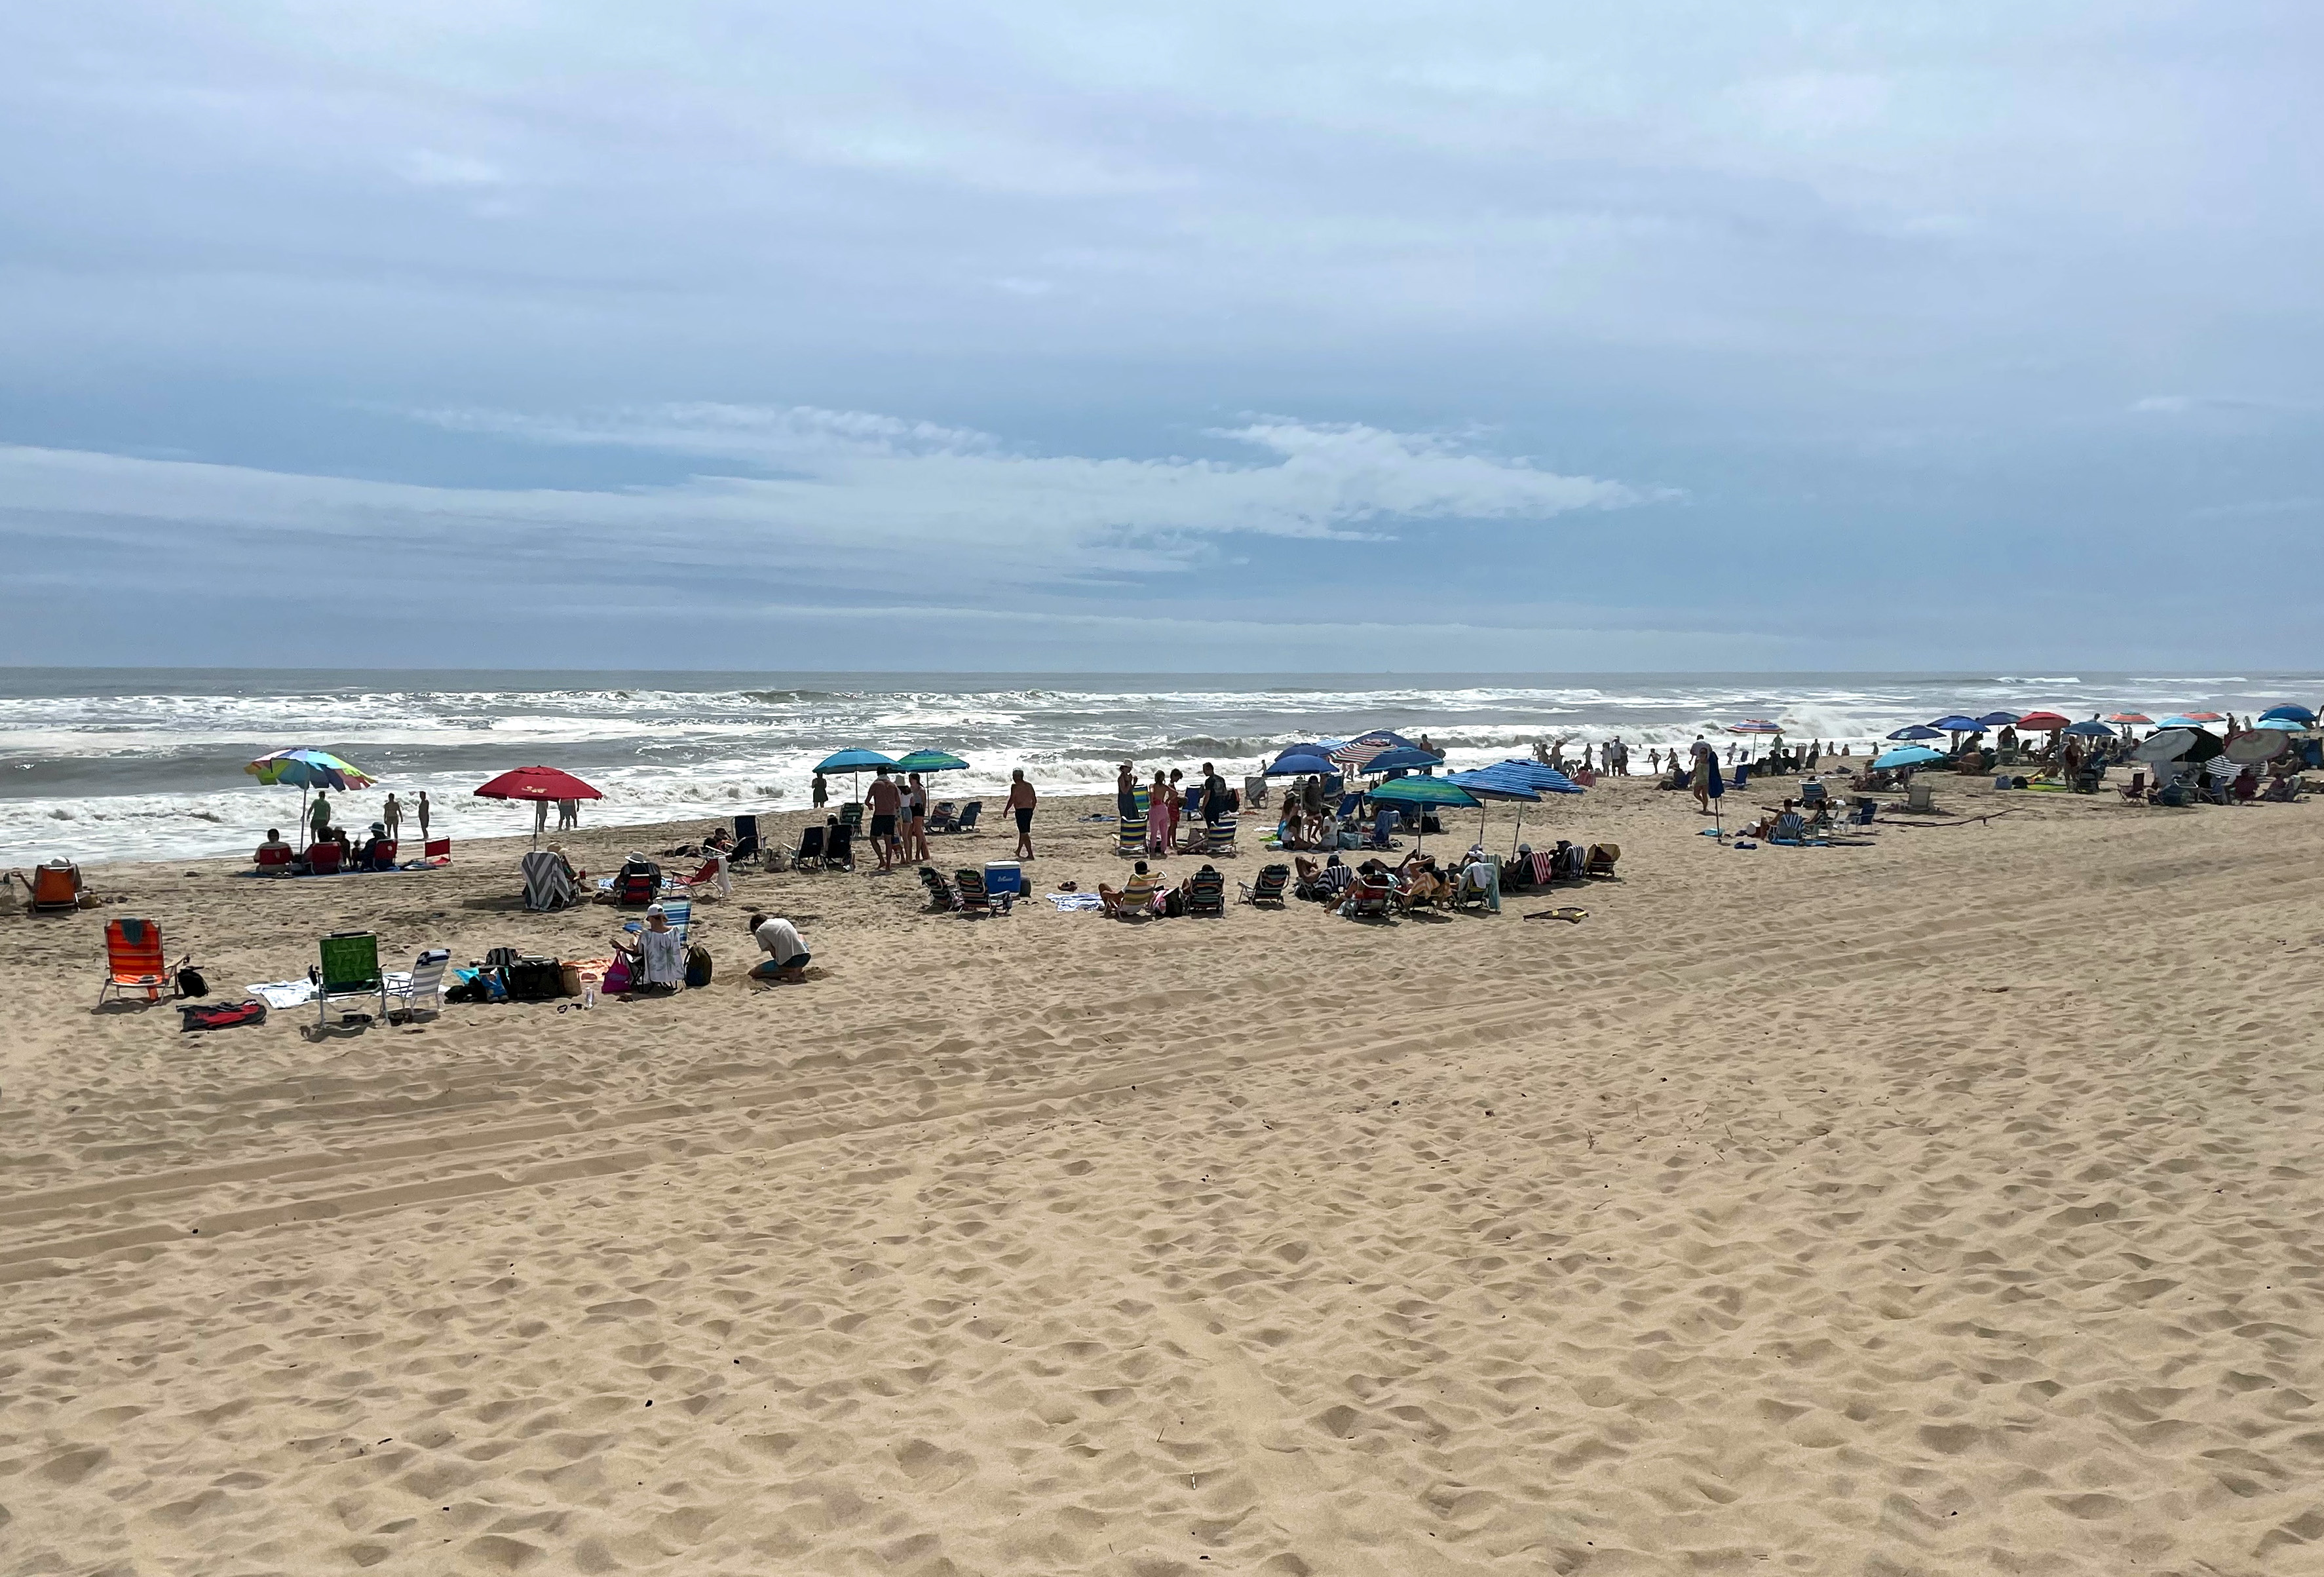 Residents and holiday makers in the Hamptons make the most of the calm before the storm at Atlantic Avenue beach ahead of Hurricane Henri's landfall, Long Island, New York, U.S., August 21, 2021. REUTERS/Leela de Kretser